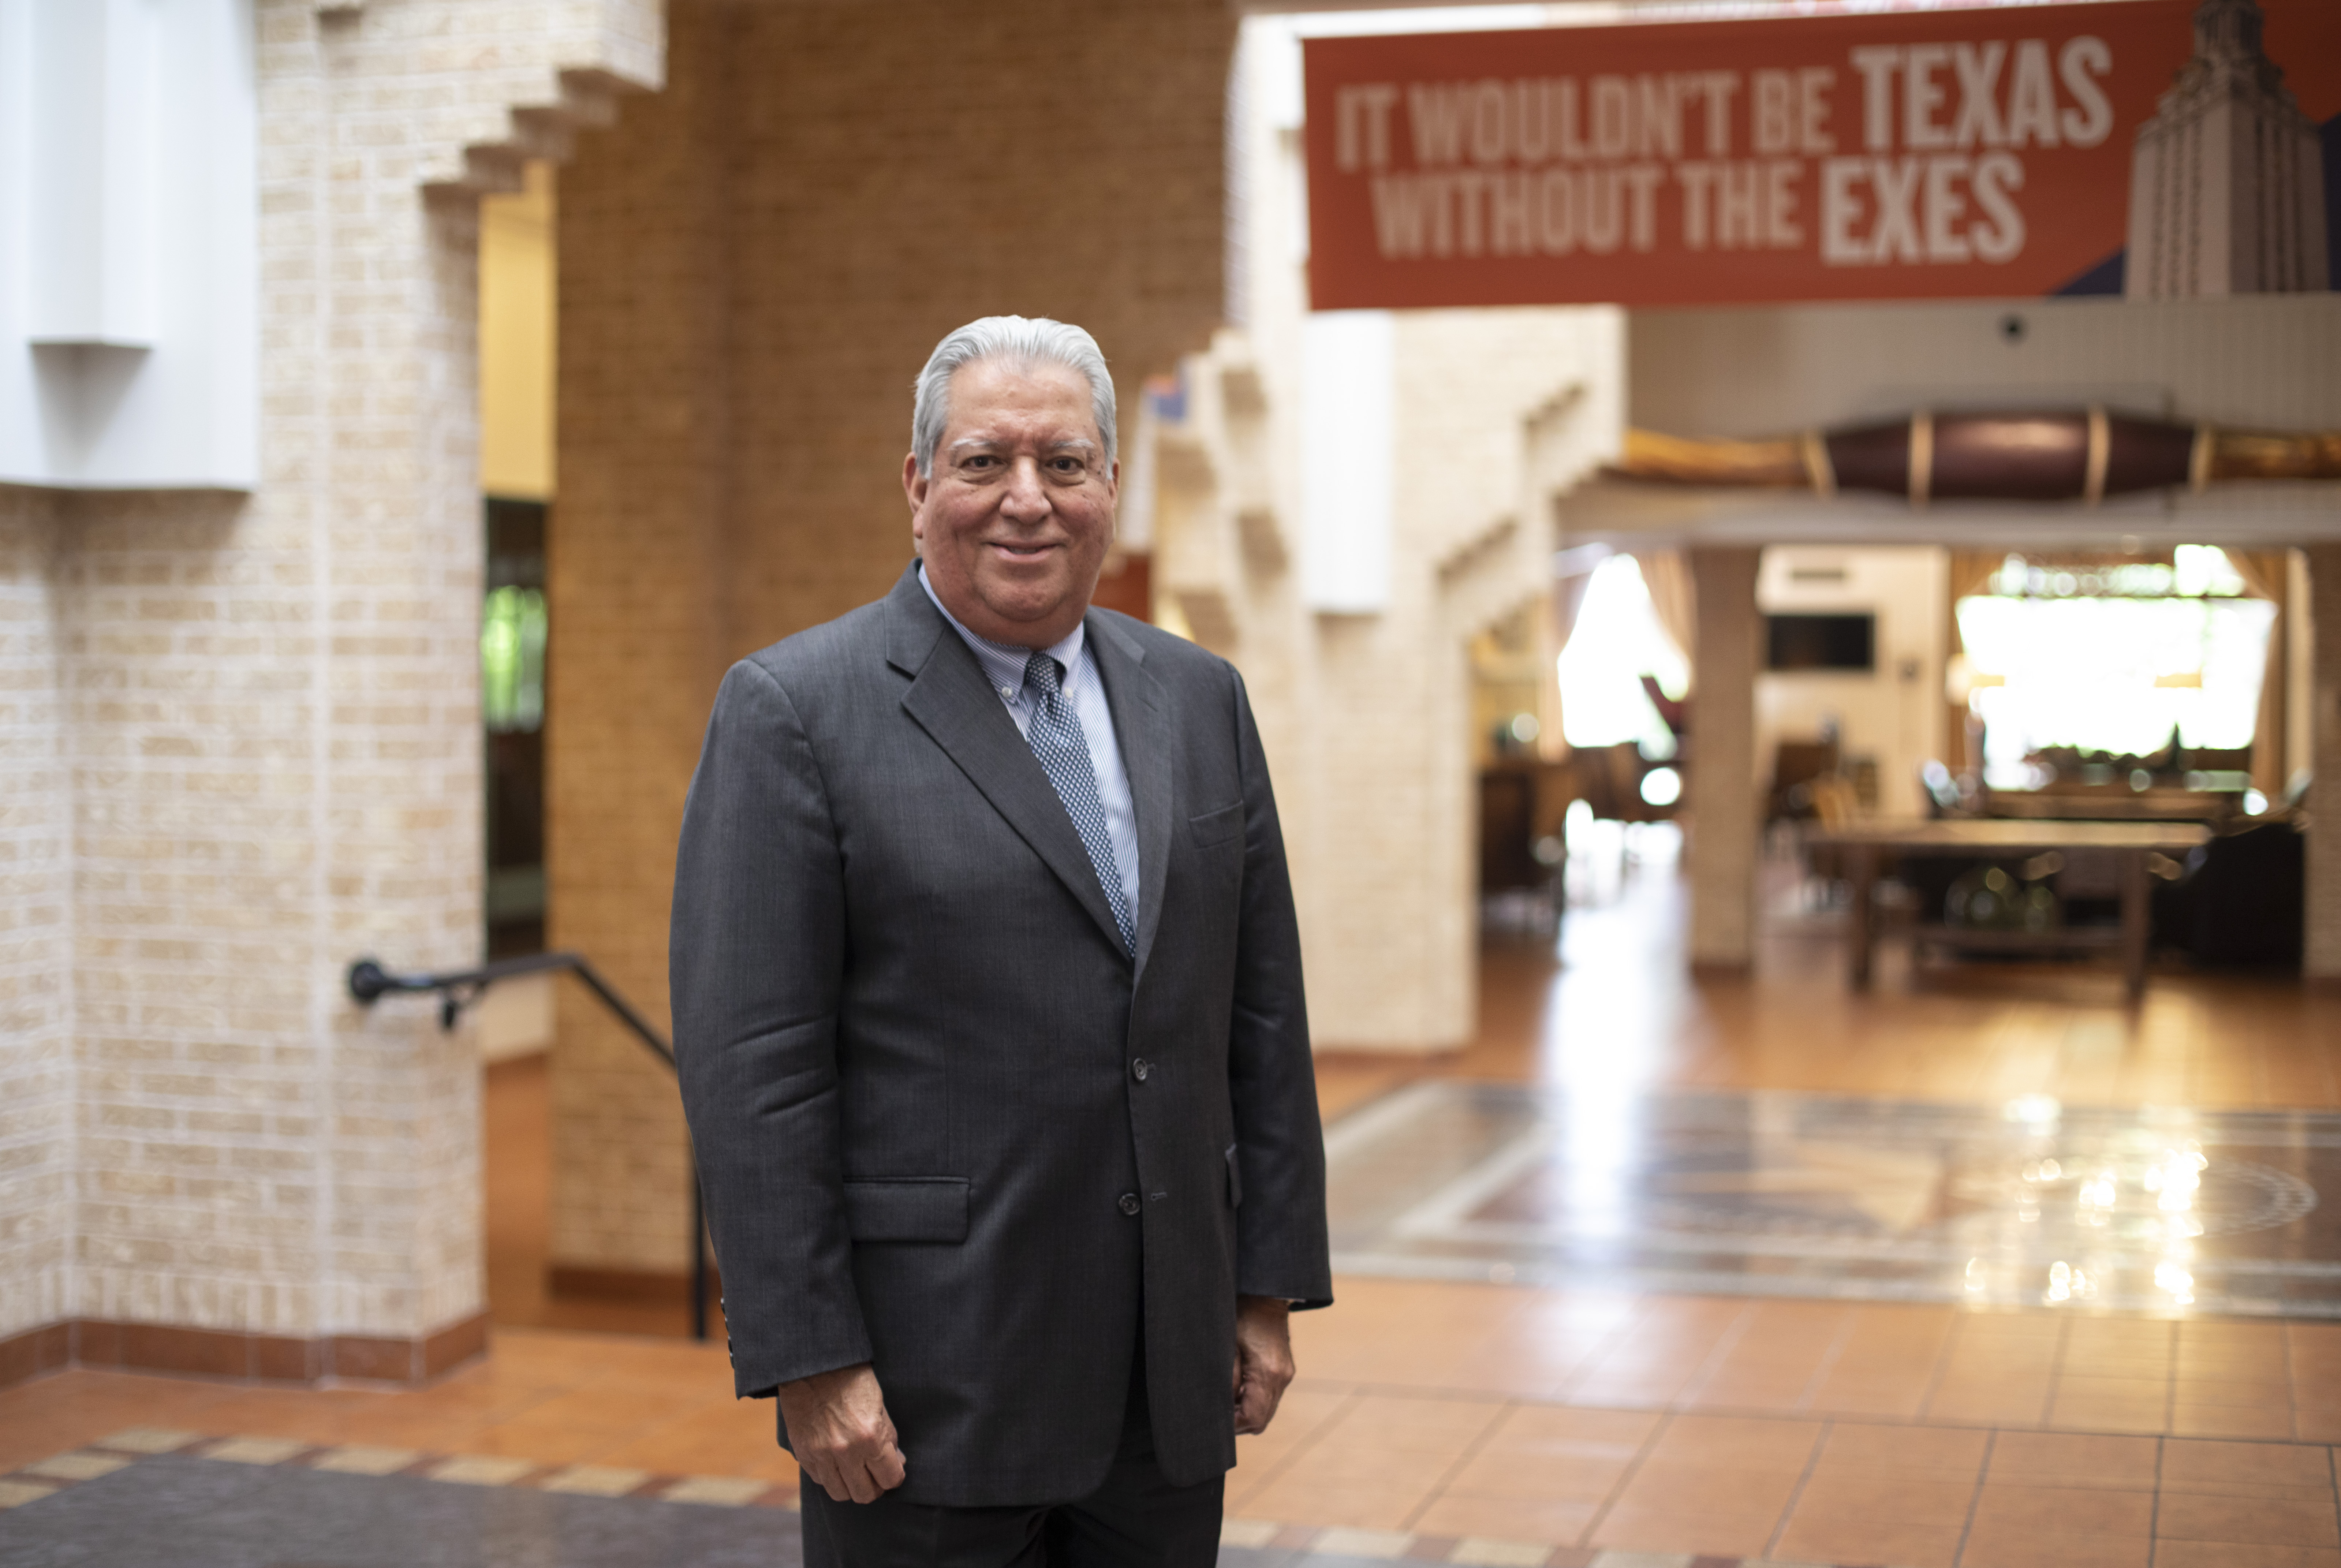 Robert Estrada, an attorney and businessman, graduated from The University of Texas in 1969.